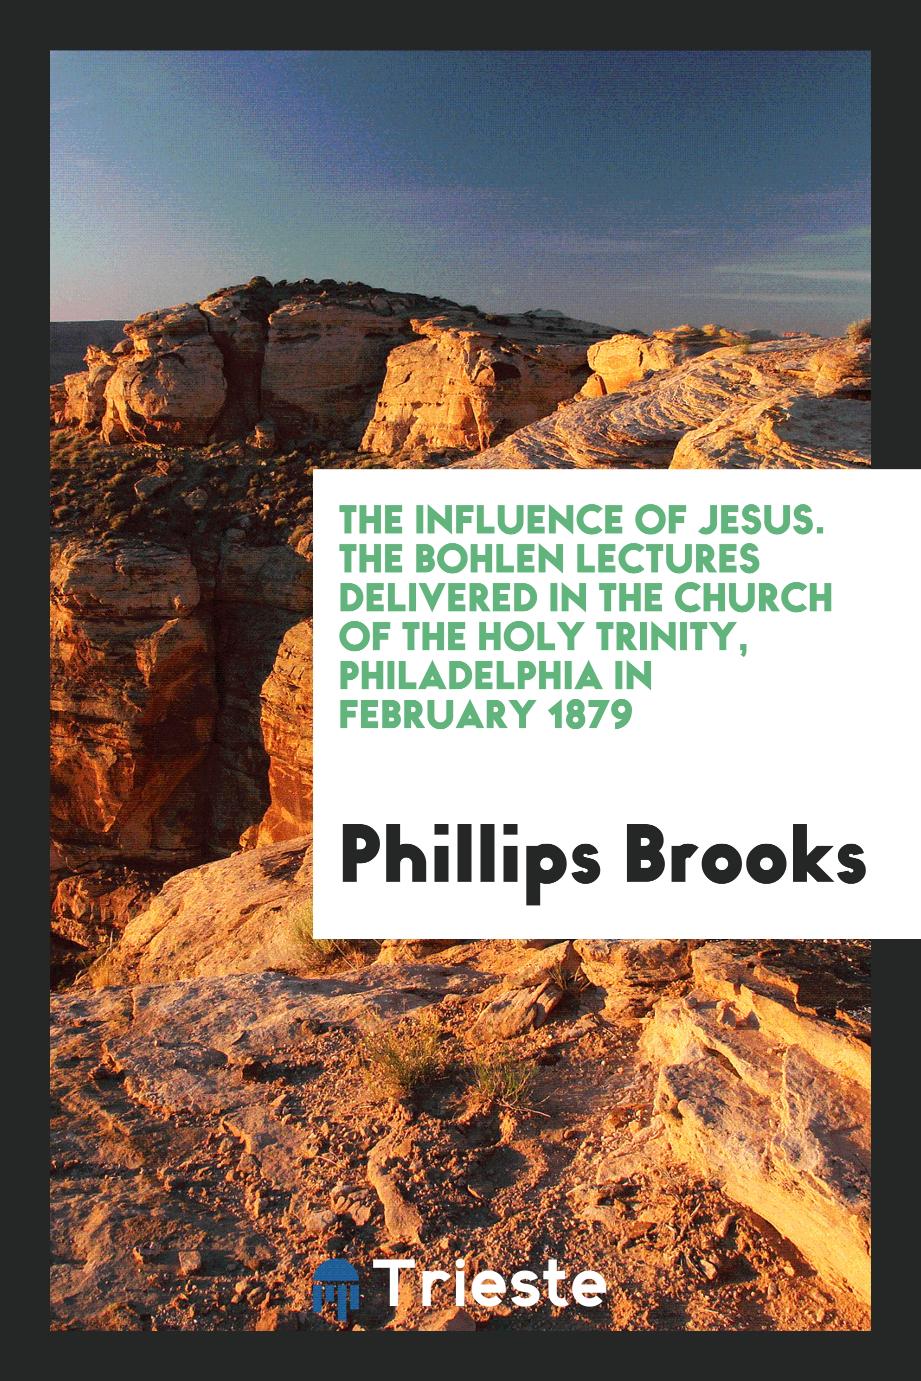 Phillips Brooks - The influence of Jesus. The Bohlen Lectures delivered in the Church of the Holy Trinity, Philadelphia in February 1879